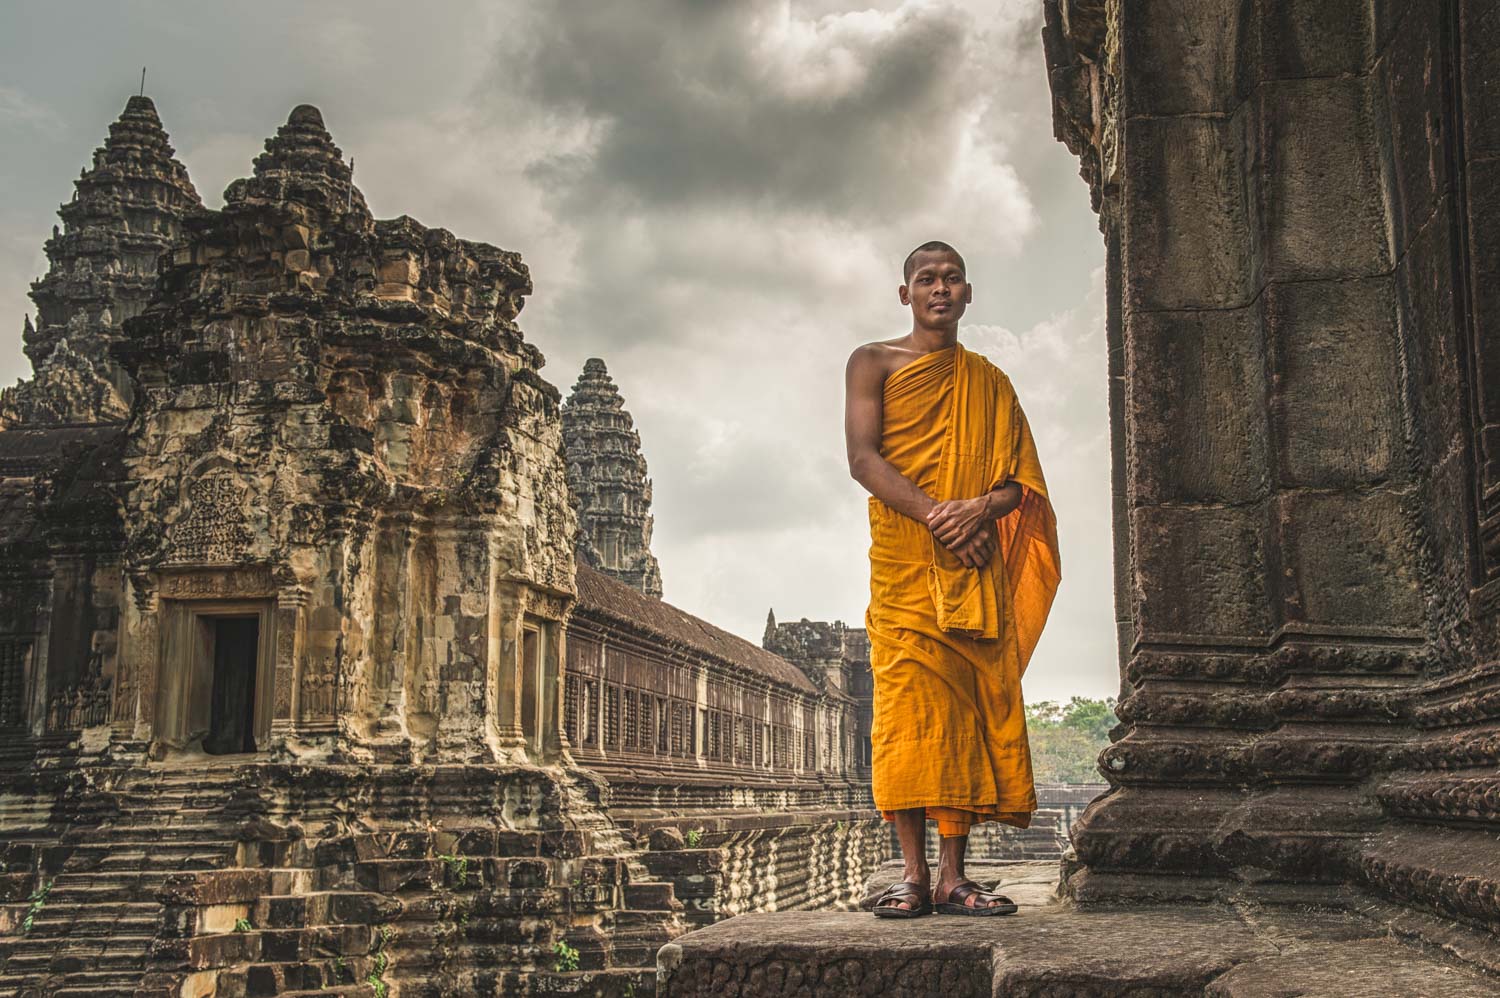 Buddhist Monk outside part of the enormous complex that is Angkor Wat;&nbsp;Nikon D4S, 32mm, f/8, 1/160s, ISO 100